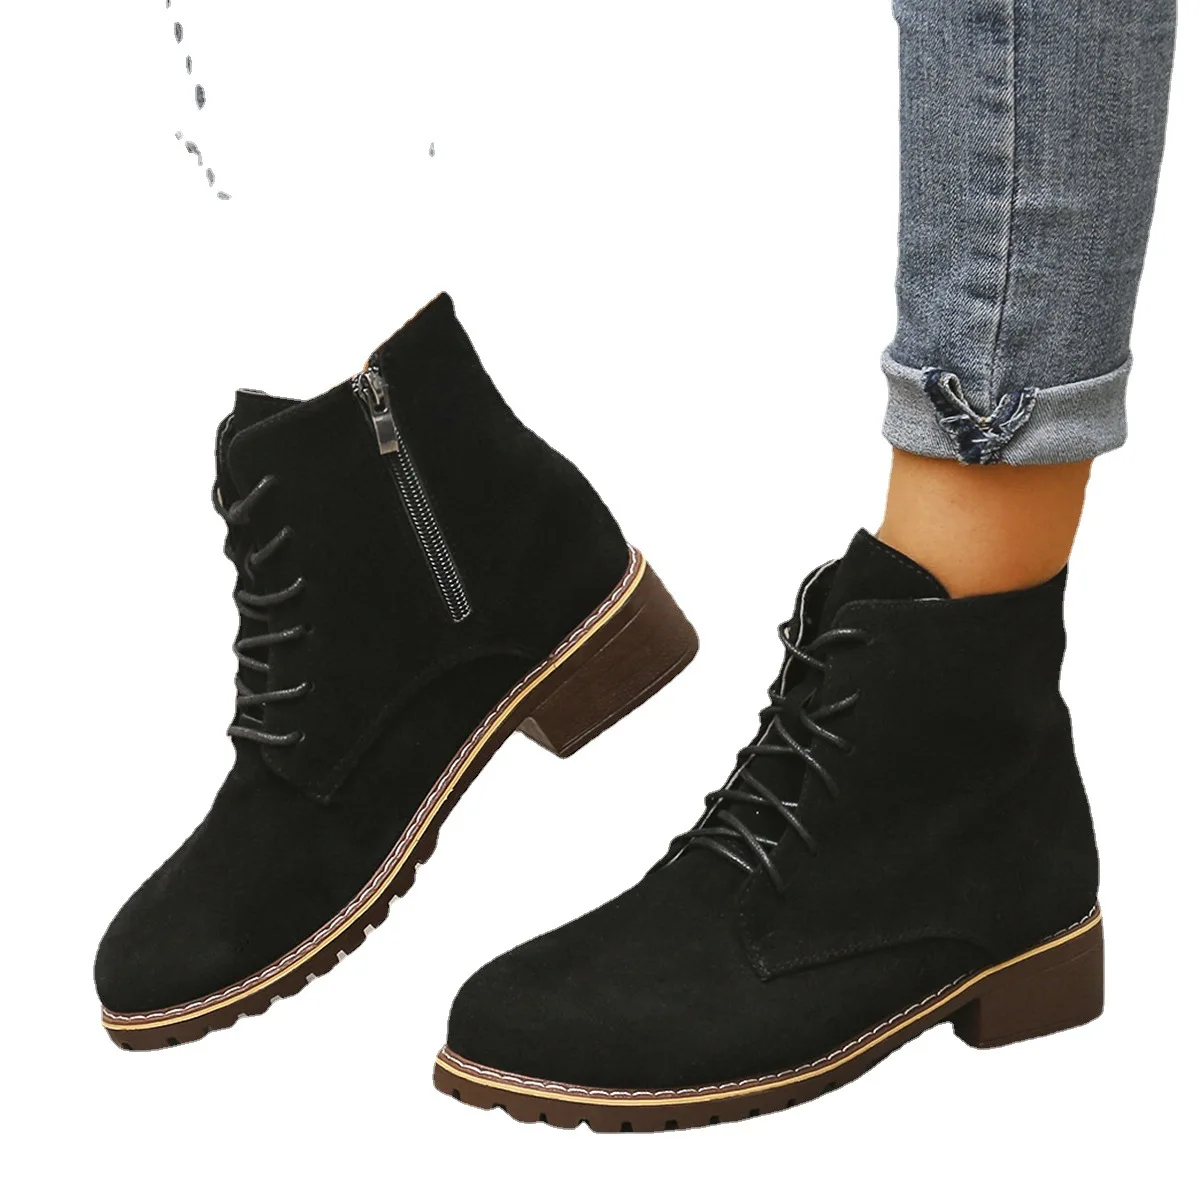 HerStyle Arlo- Low Stacked Heel Almond Toe Casual Ankle Booties (Black)